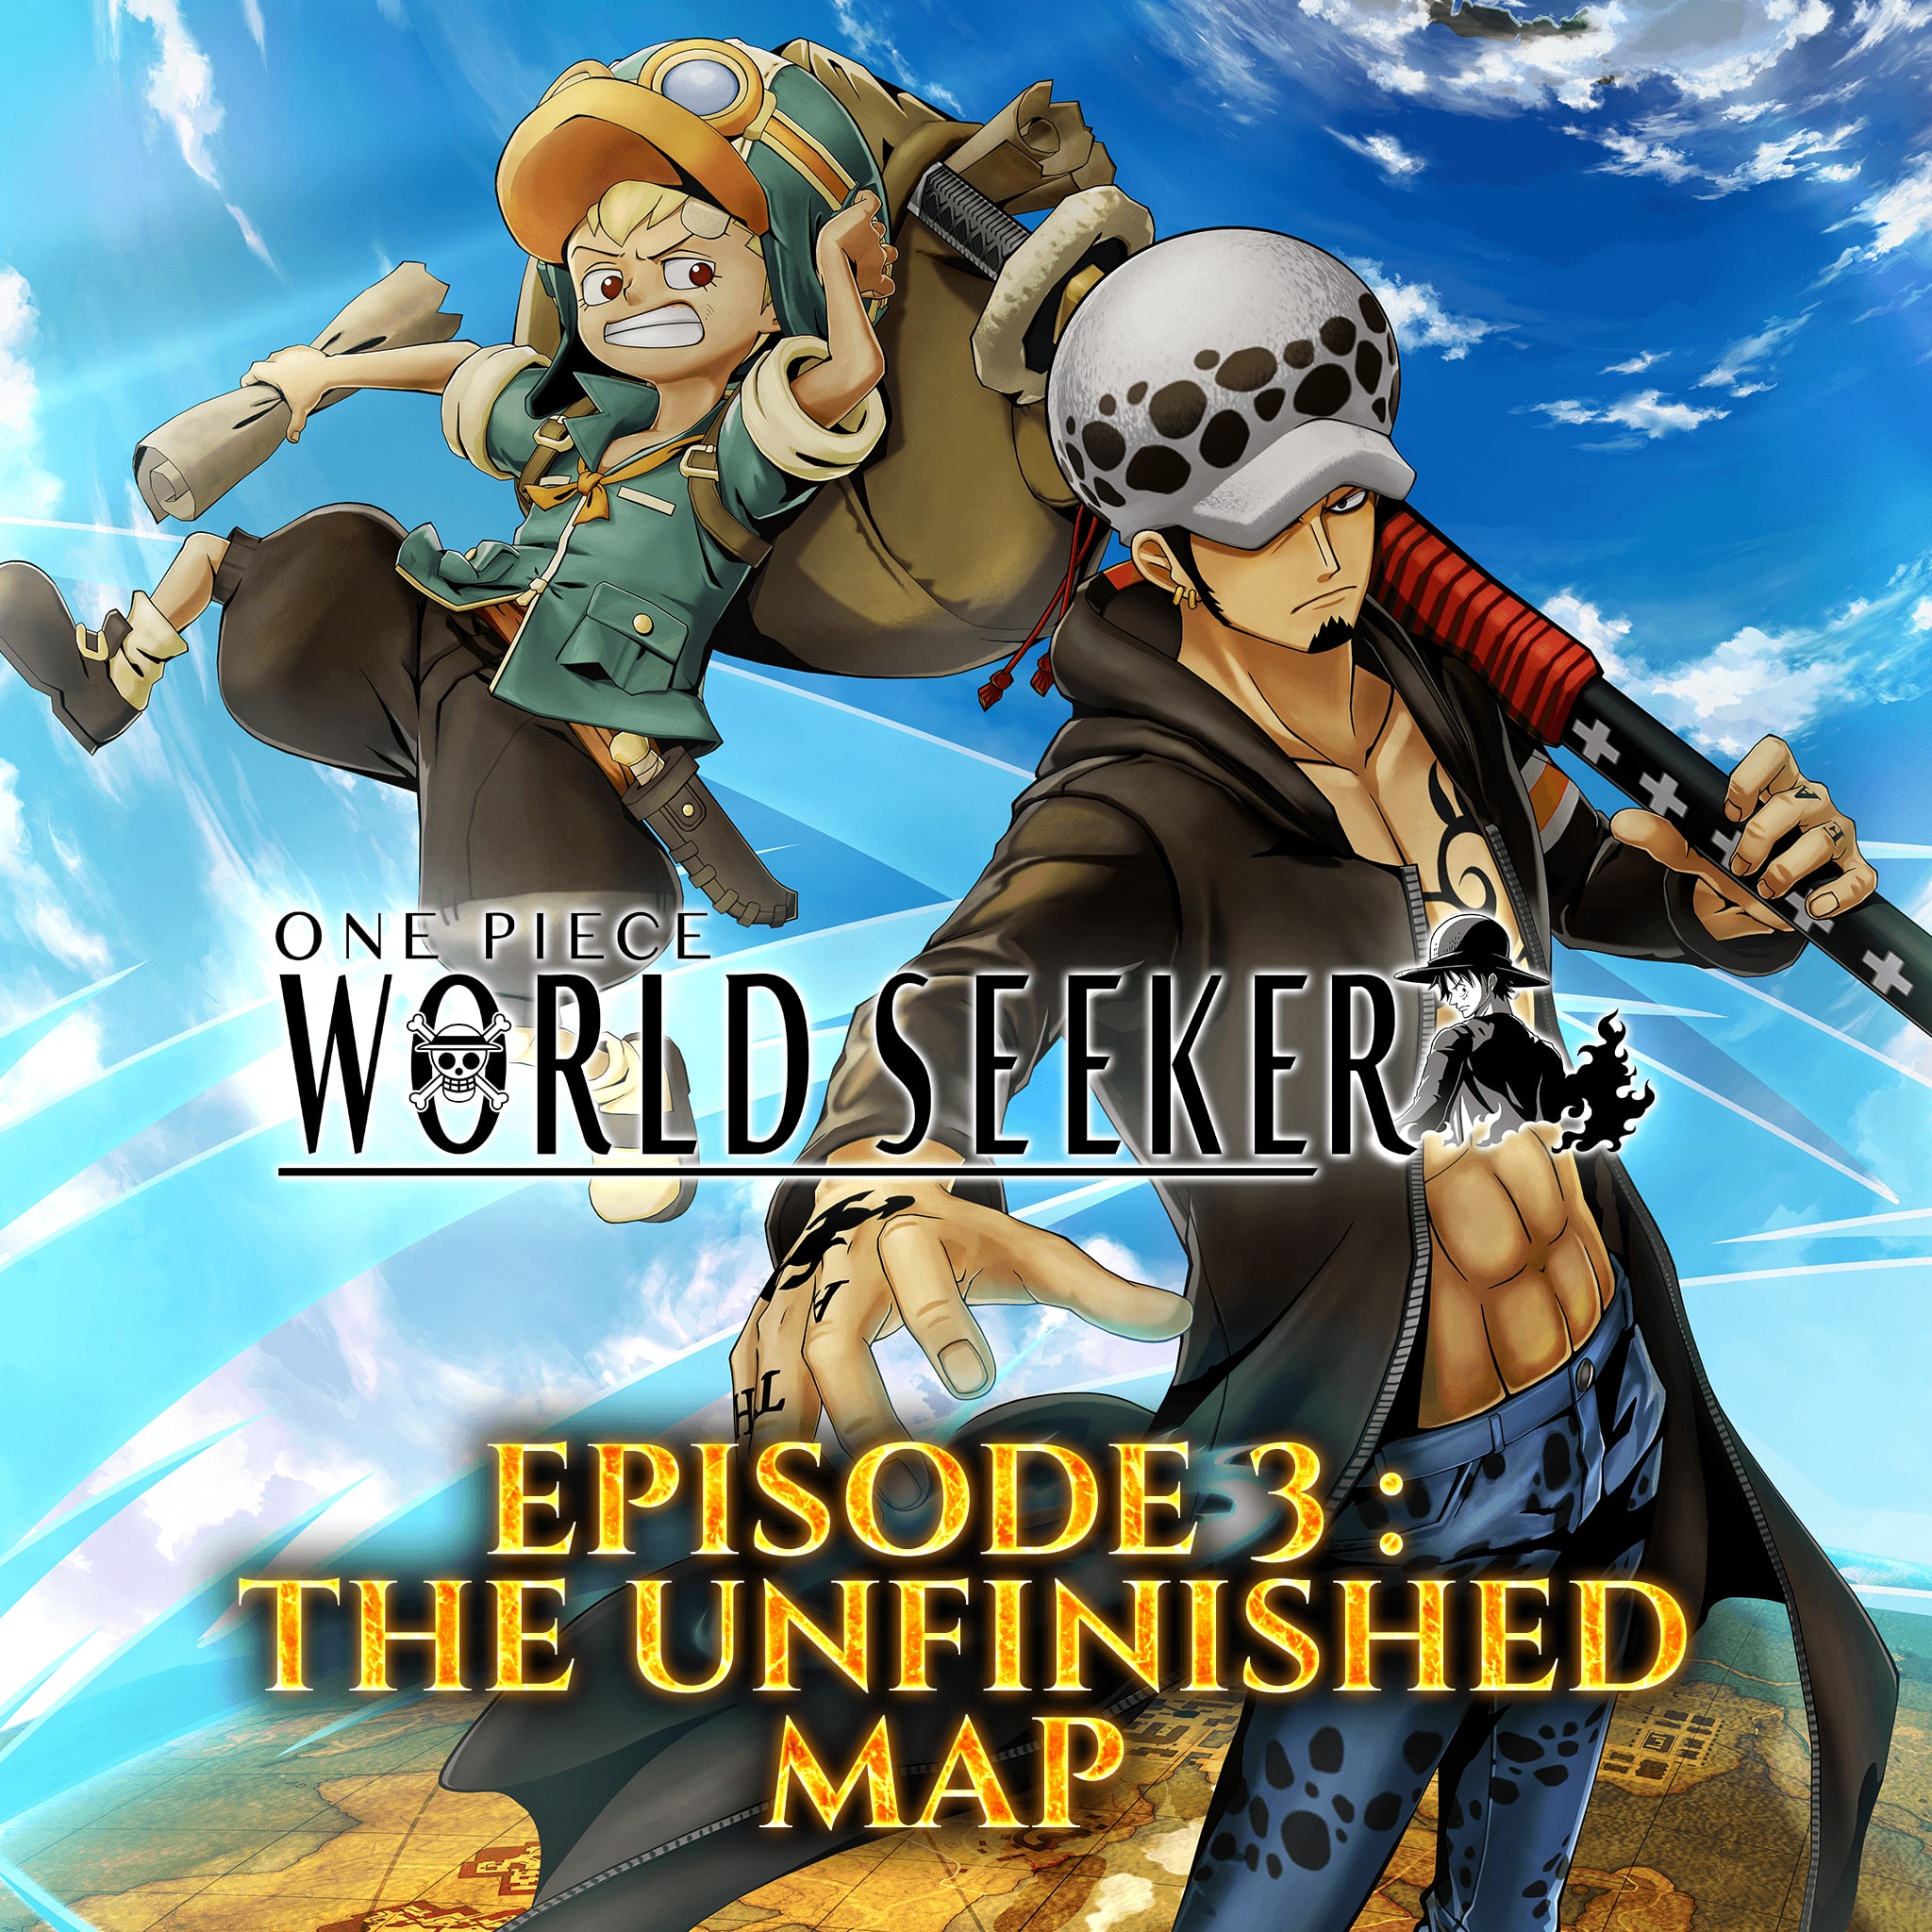 ONE PIECE World Seeker Extra Episode 3: The Unfinished Map